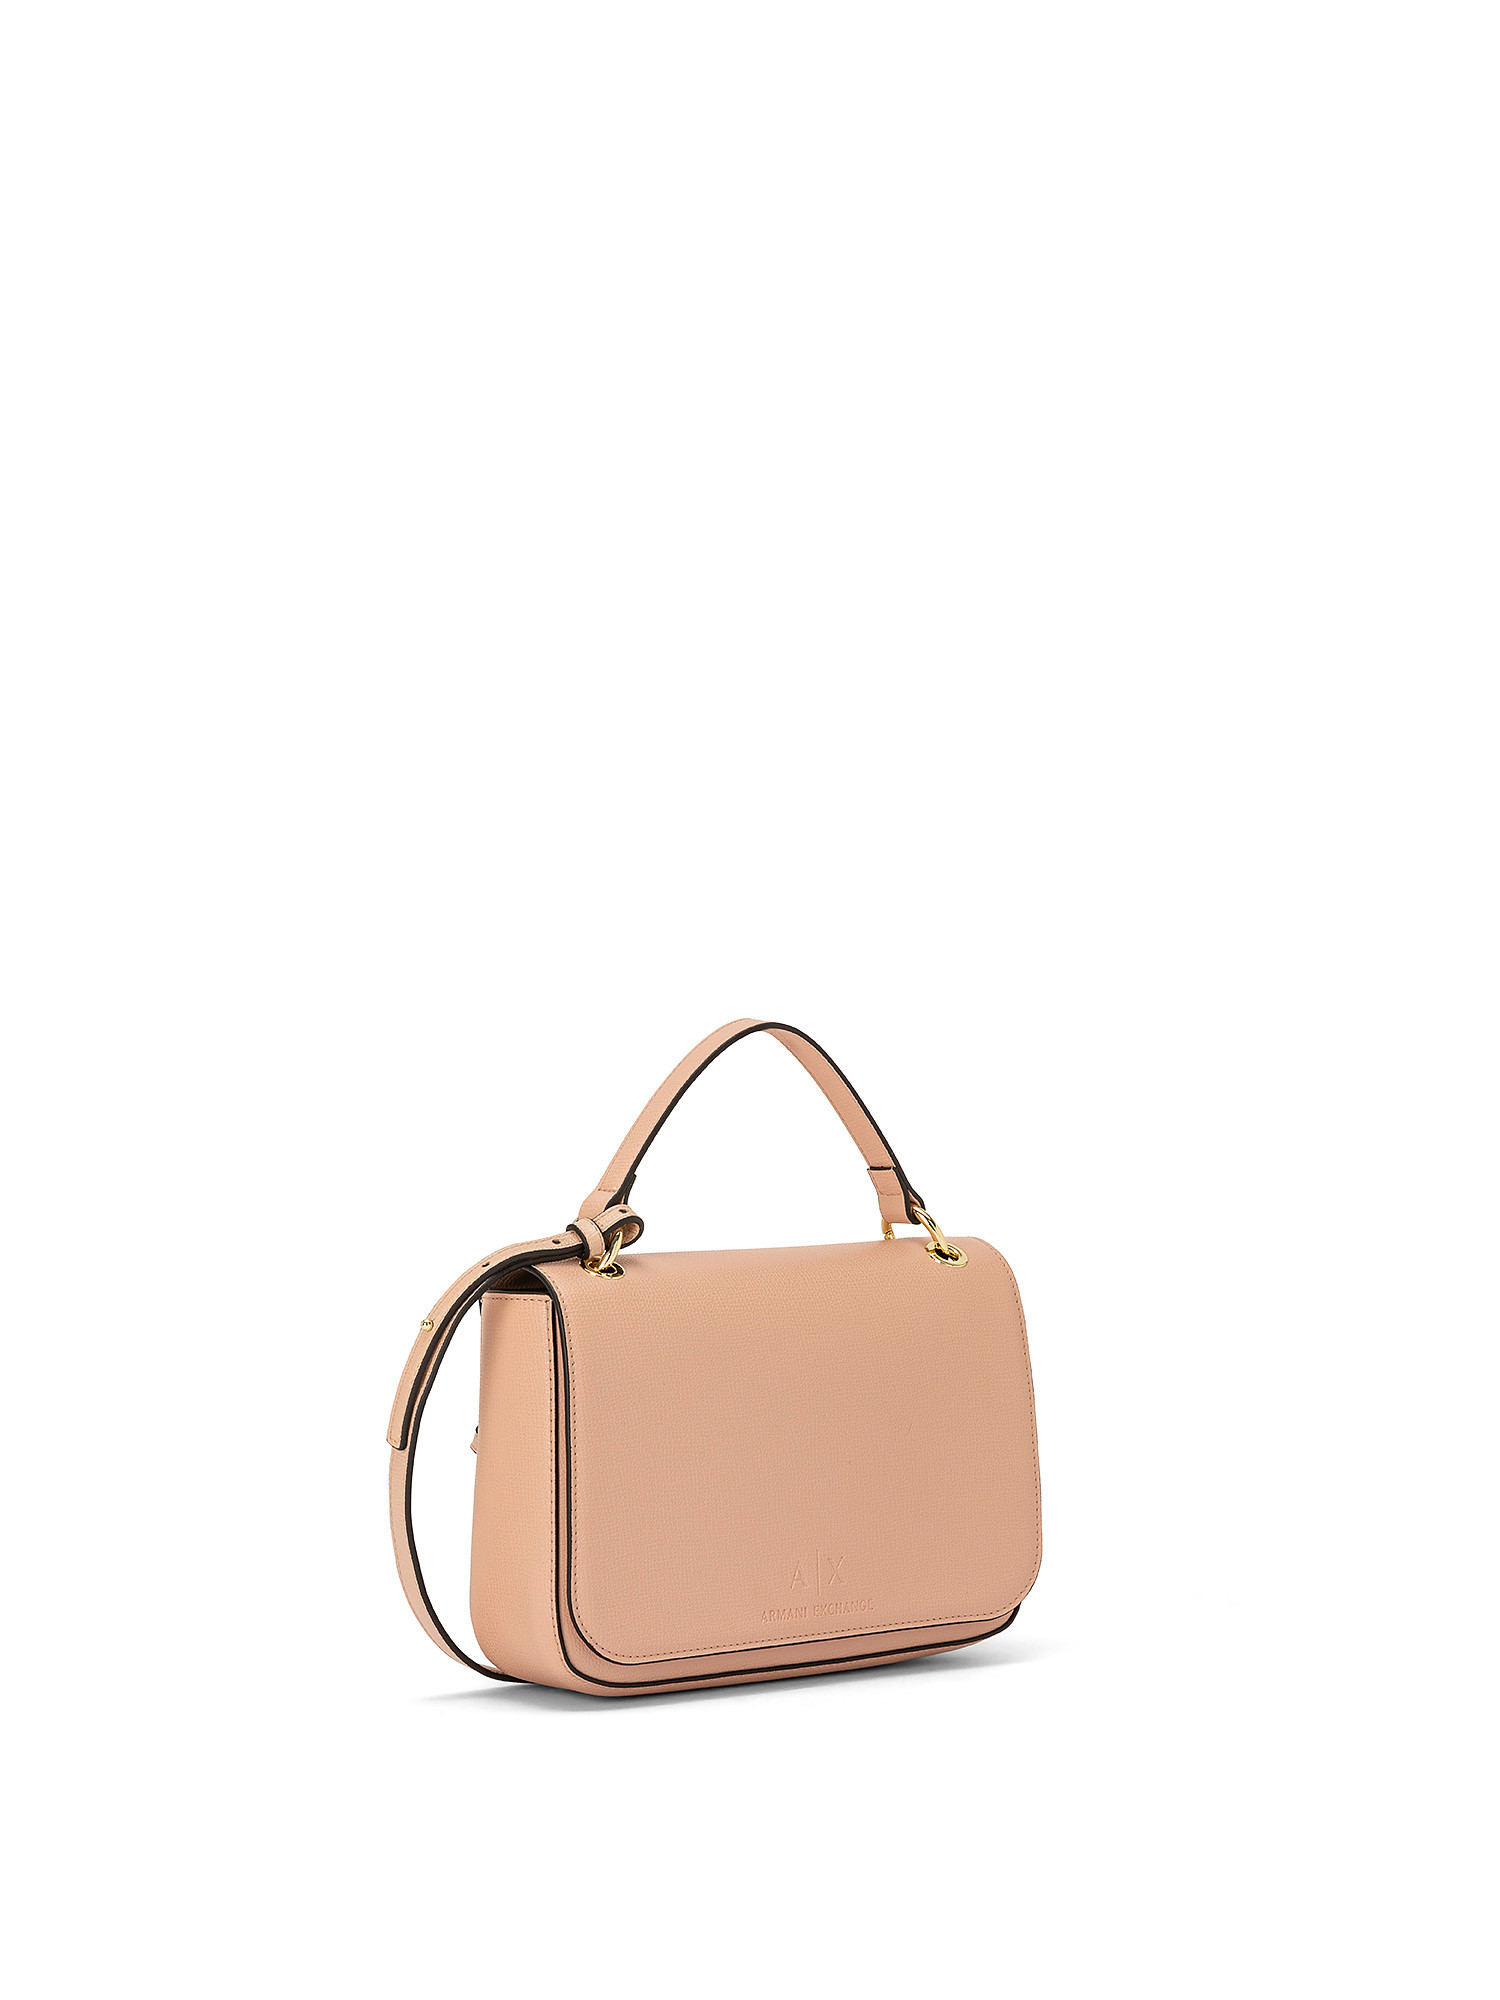 Borsa a tracolla media, Beige, large image number 1